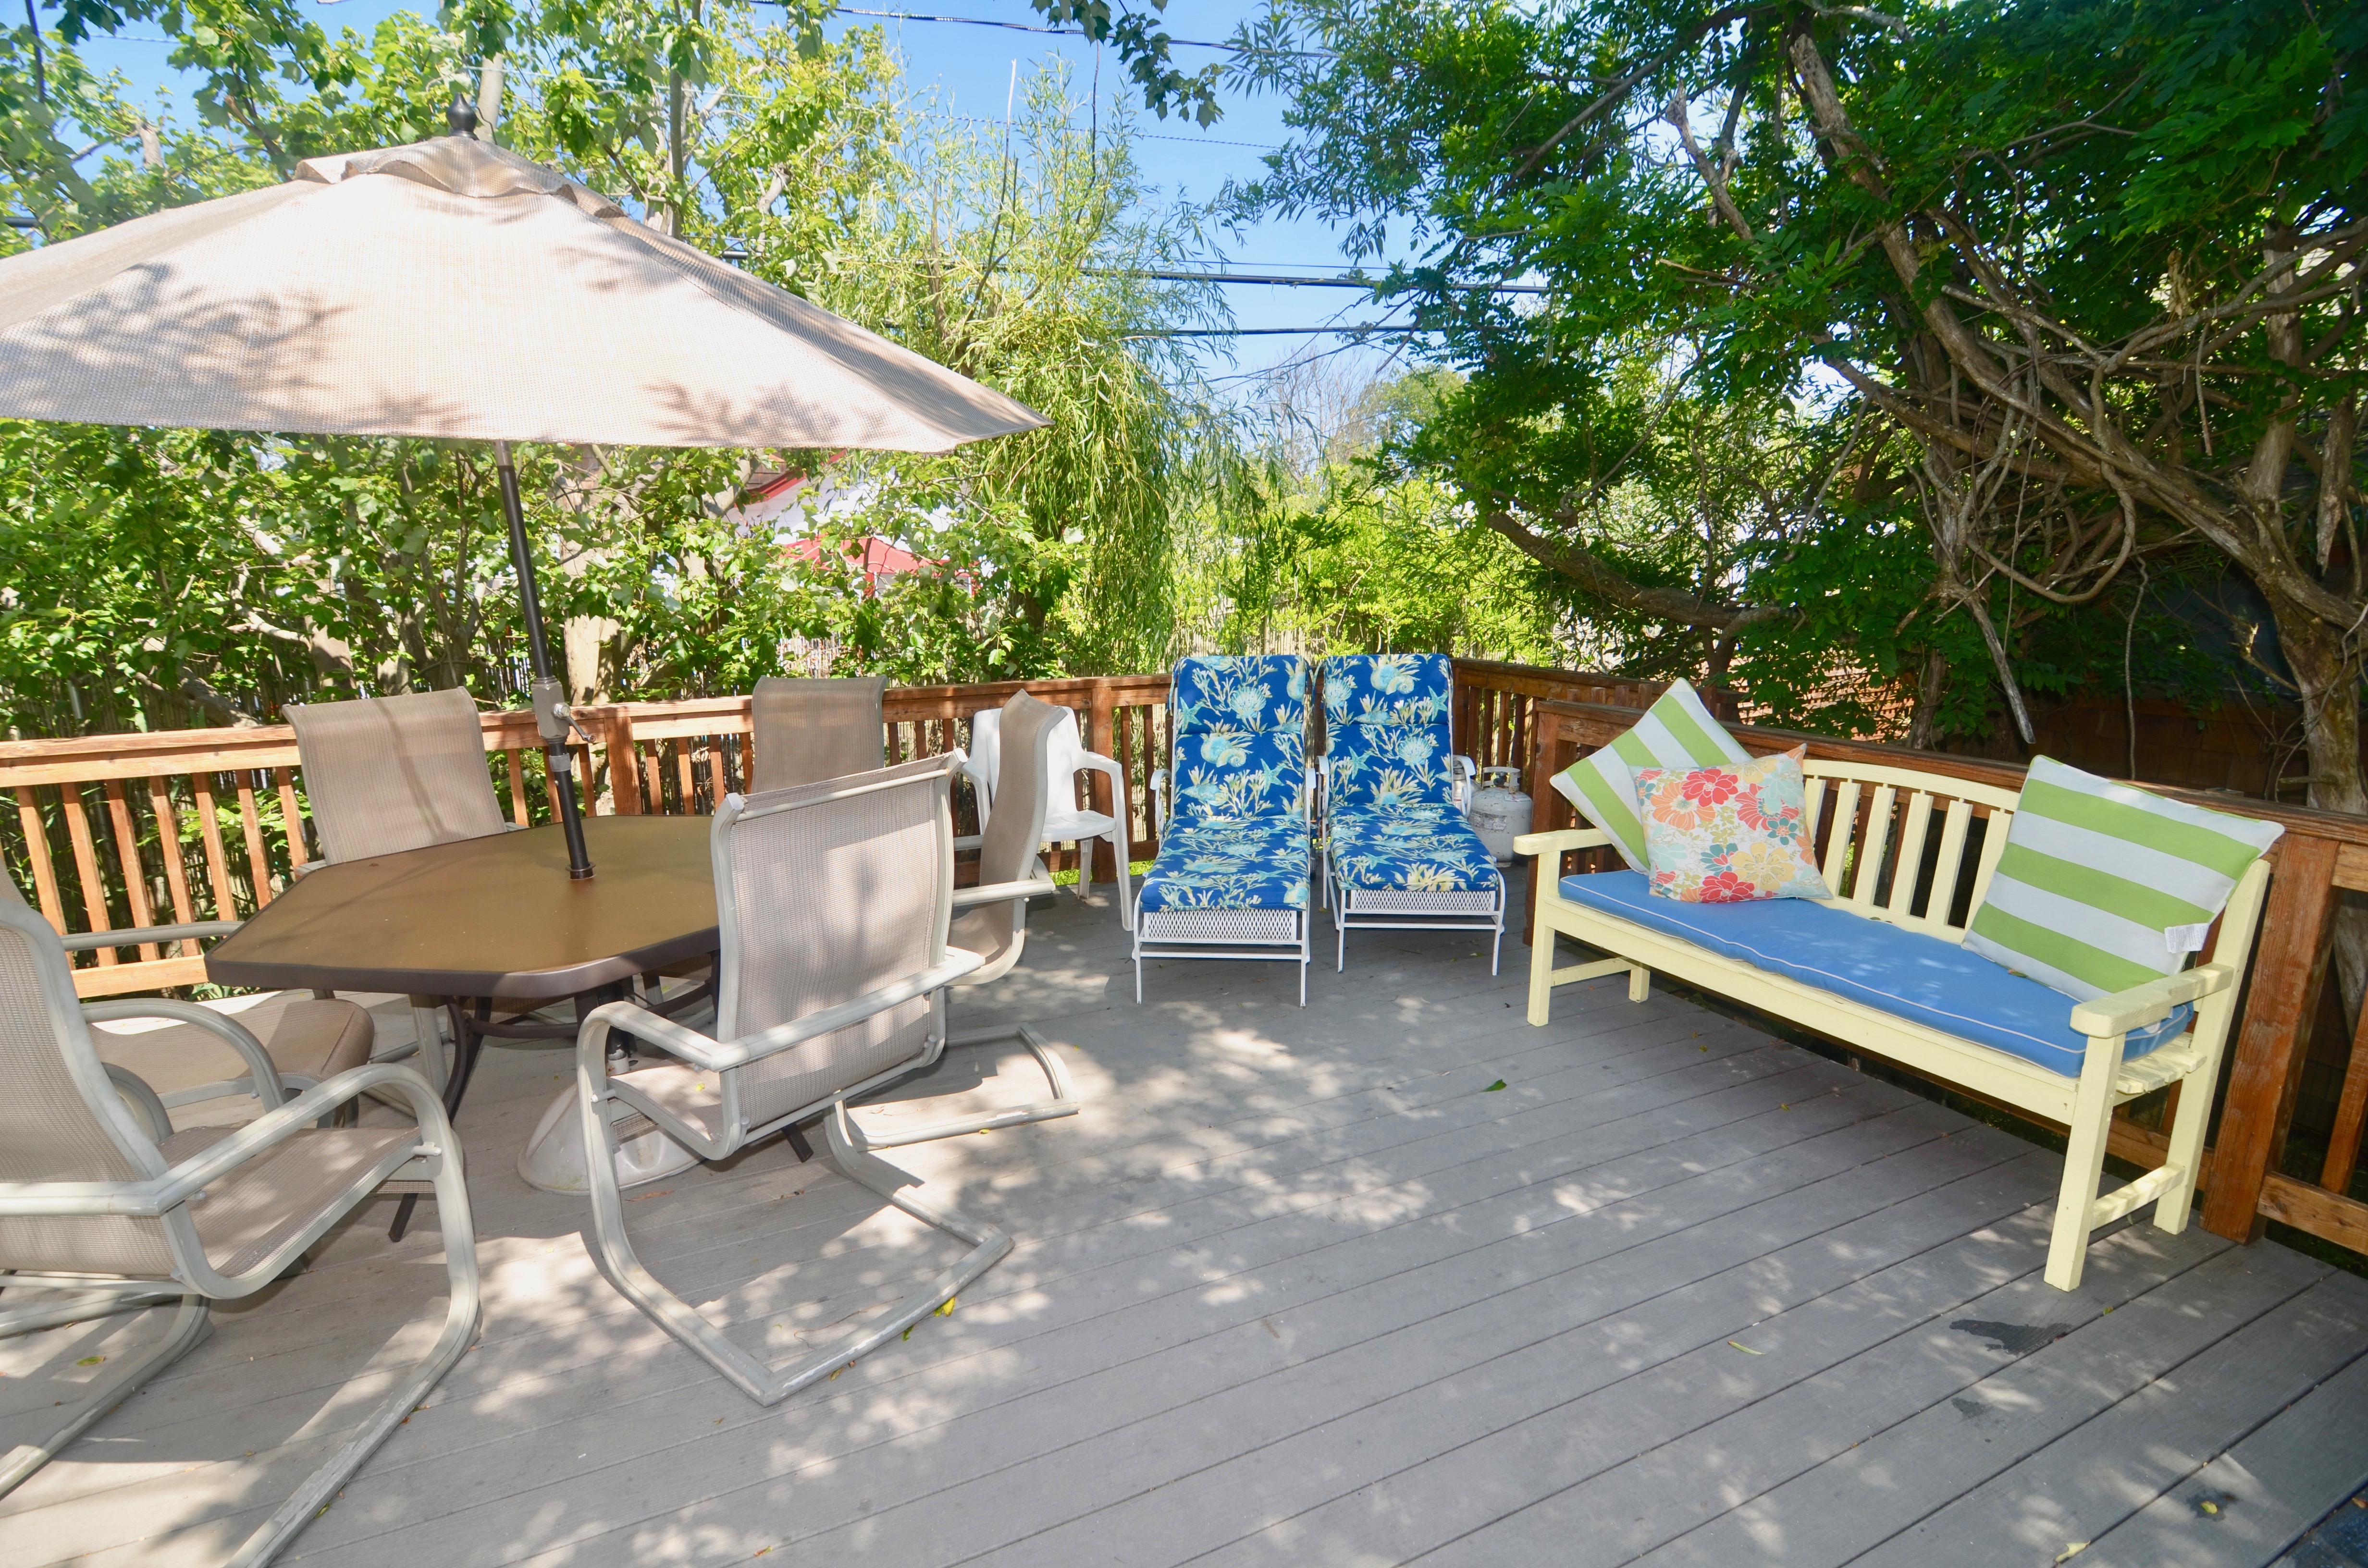 Beautifully updated 4 bedroom, 3 bathroom home in desirable Ocean Beach. Bright and airy, spacious living space, 2 master en-suites. Great outdoor deck for entertaining! Only 3 minutes from the beach!  
<br>
Availability:
<Br>
July 15th-July 21st
<br>
July 22nd-July 28th
<br>
July 29th-August 4th
<br>
August 5th-August 11th